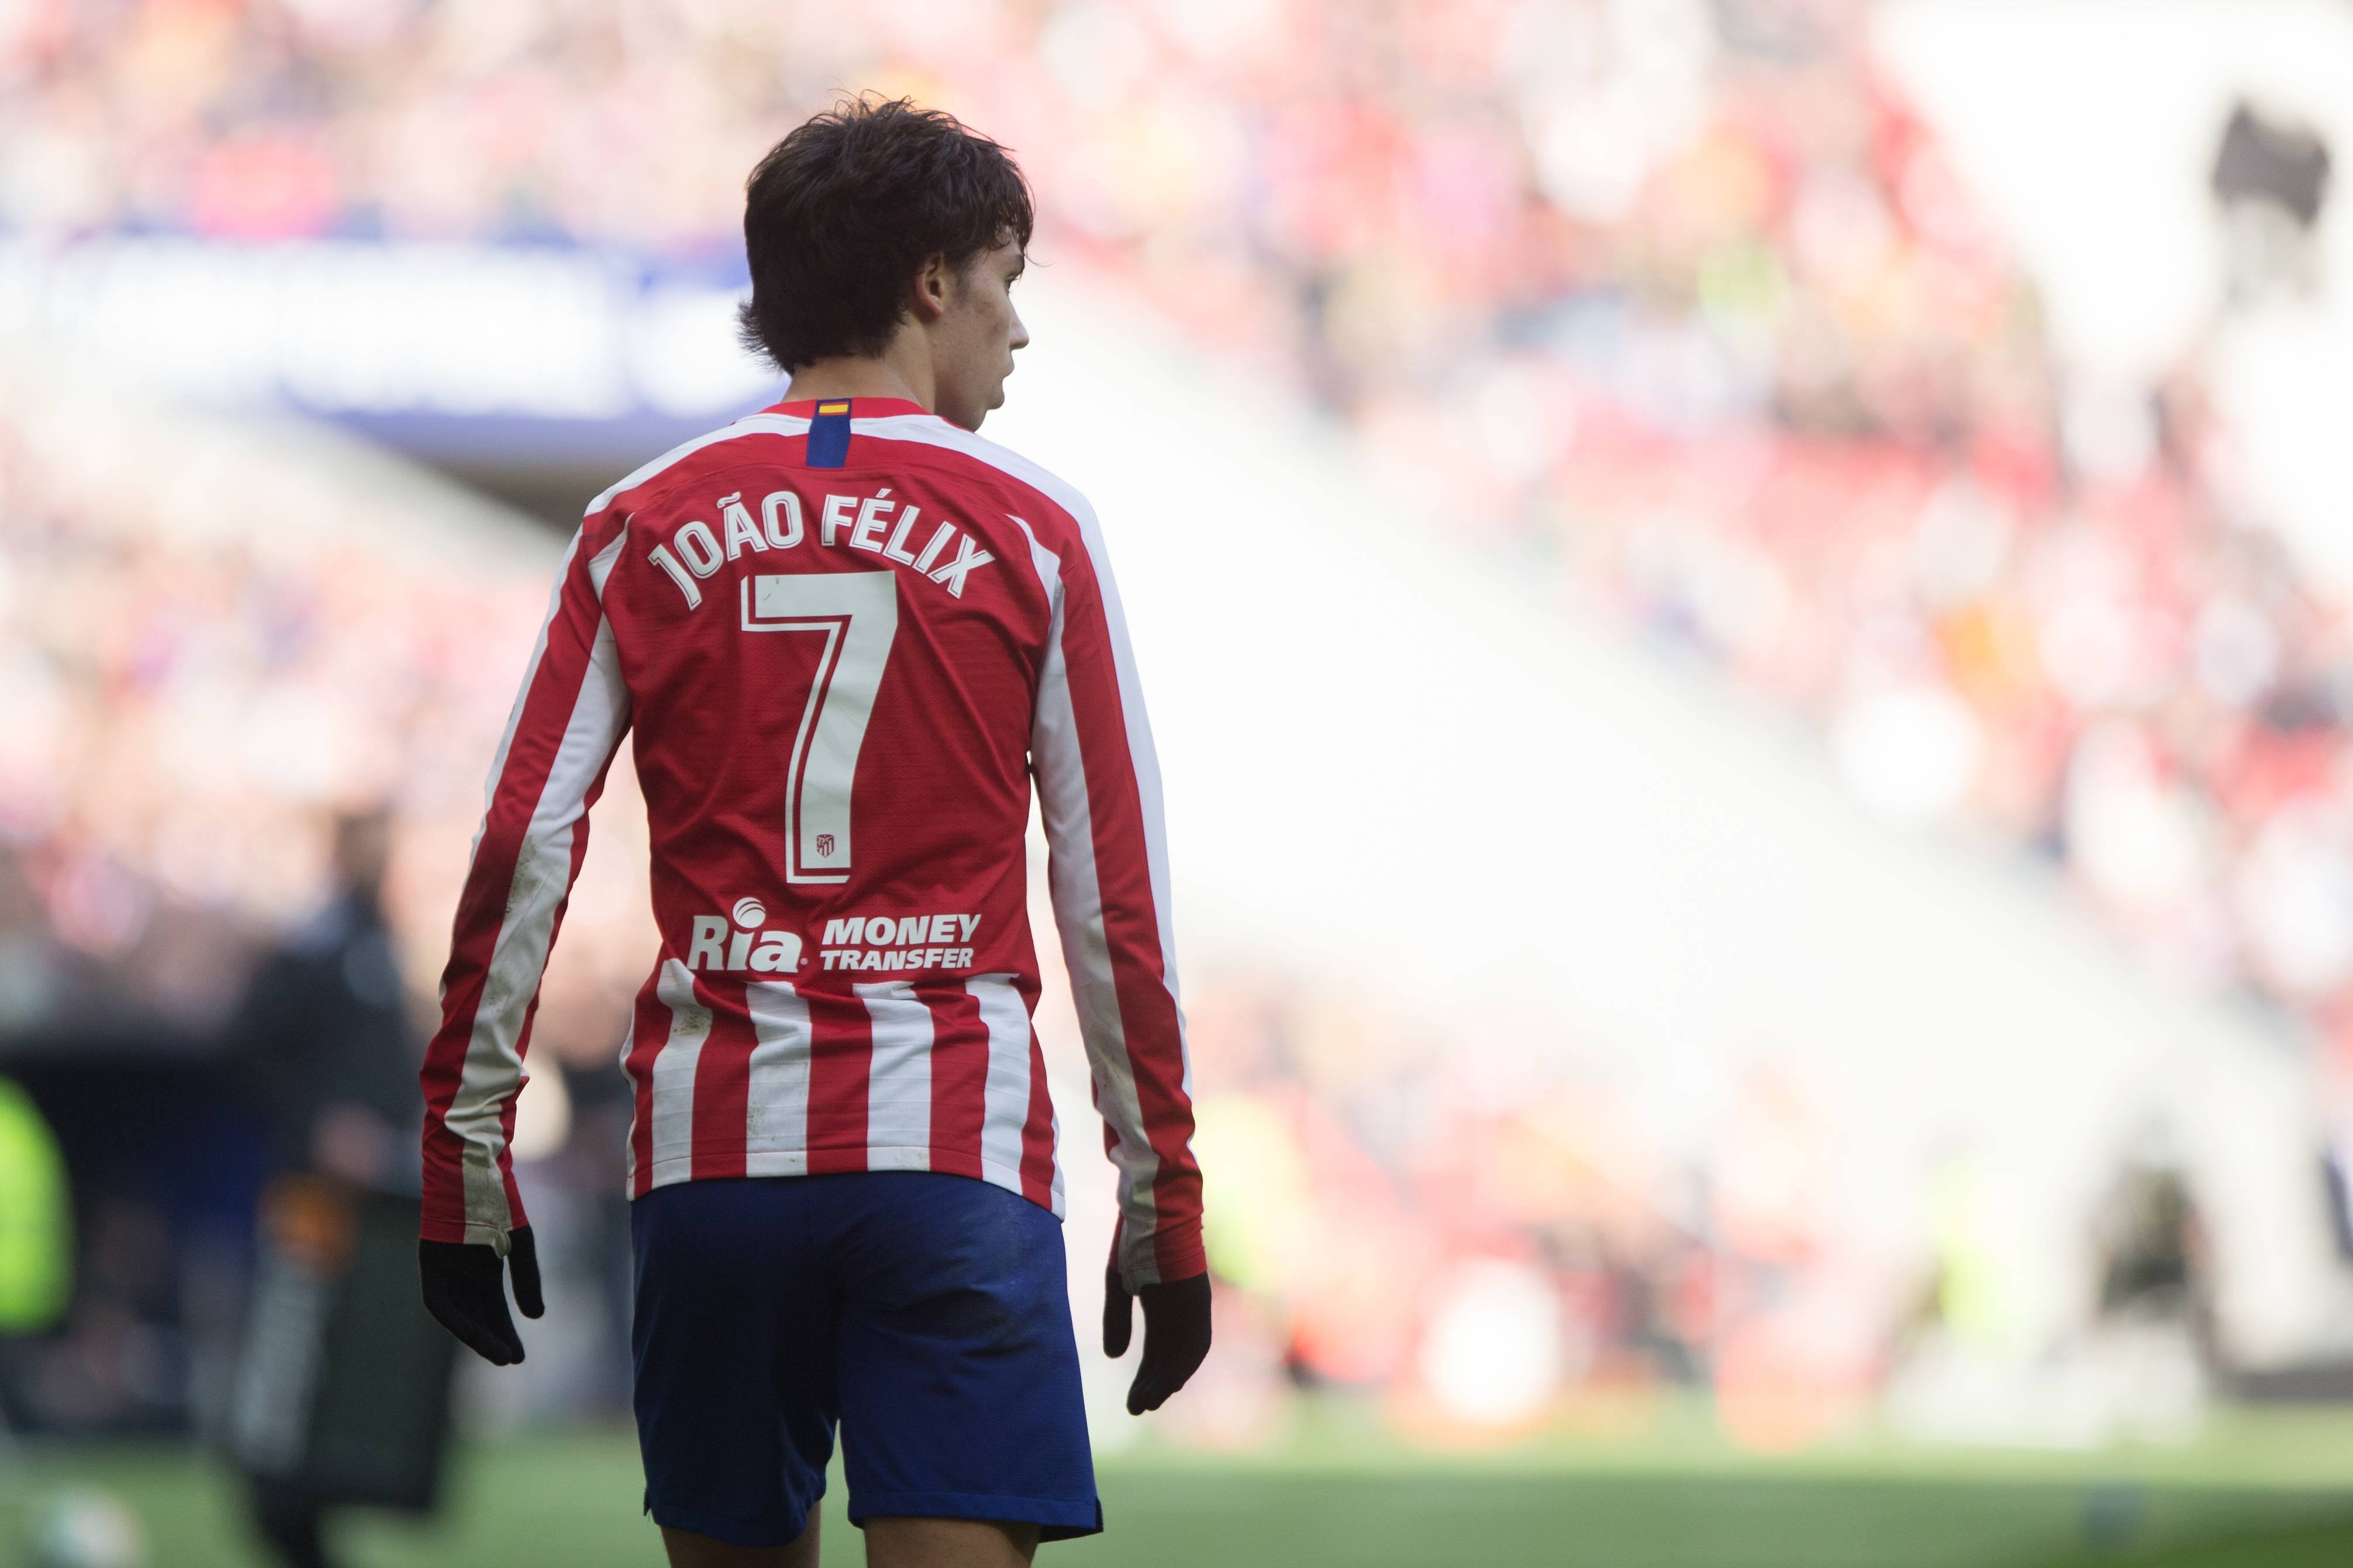 Have no doubt that Joao Felix can be great player or even Ballon d’Or winner, proclaims Stefan Savic